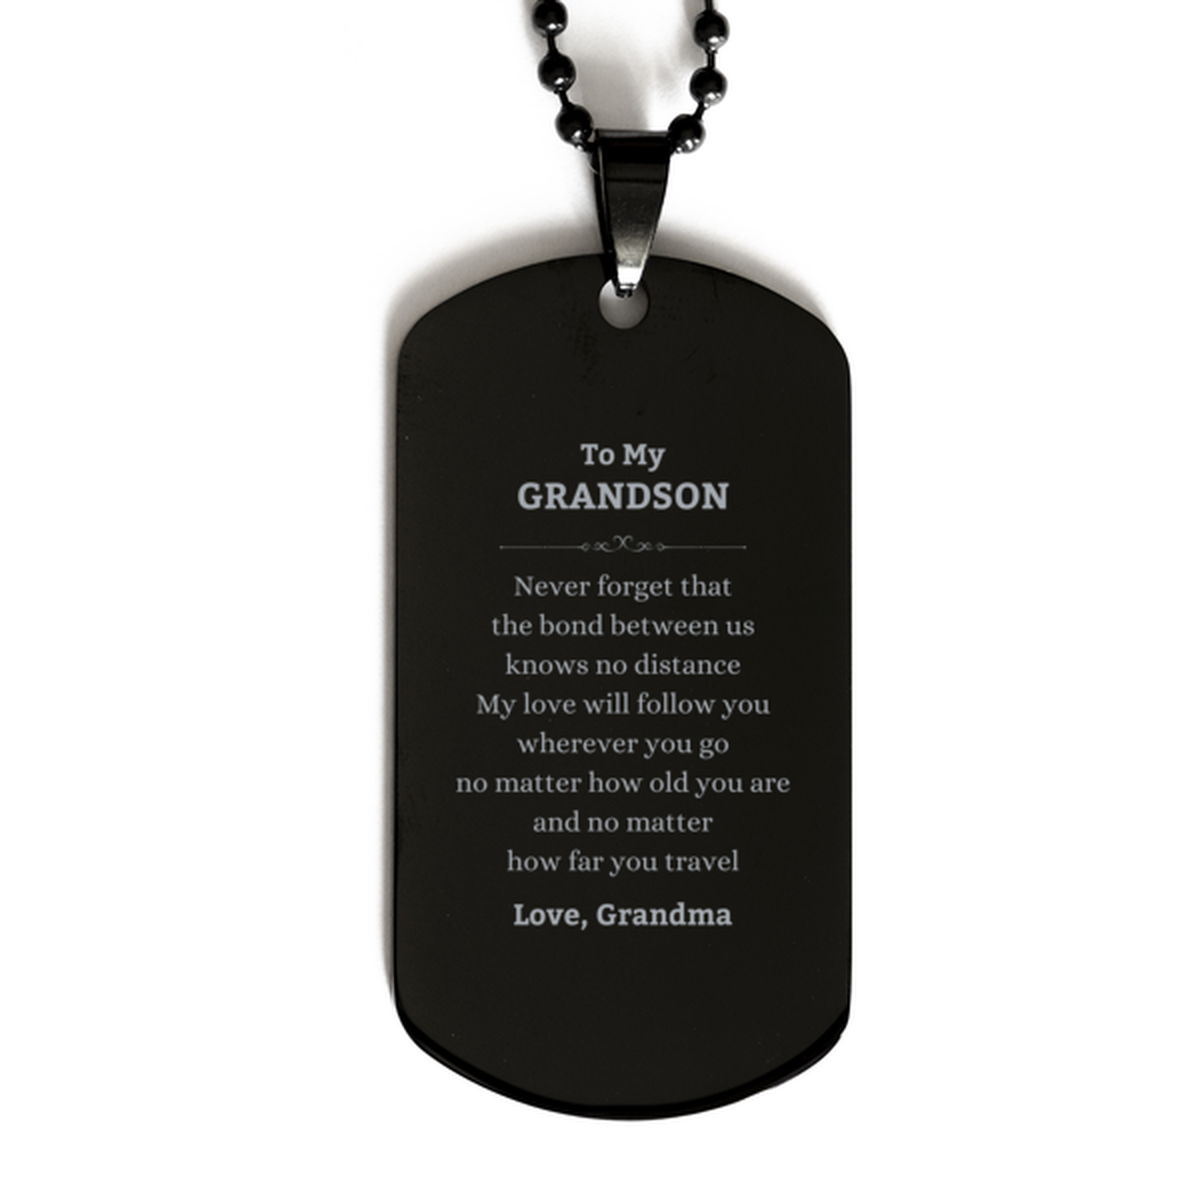 Grandson Birthday Gifts from Grandma, Adjustable Black Dog Tag for Grandson Christmas Graduation Unique Gifts Grandson Never forget that the bond between us knows no distance. Love, Grandma